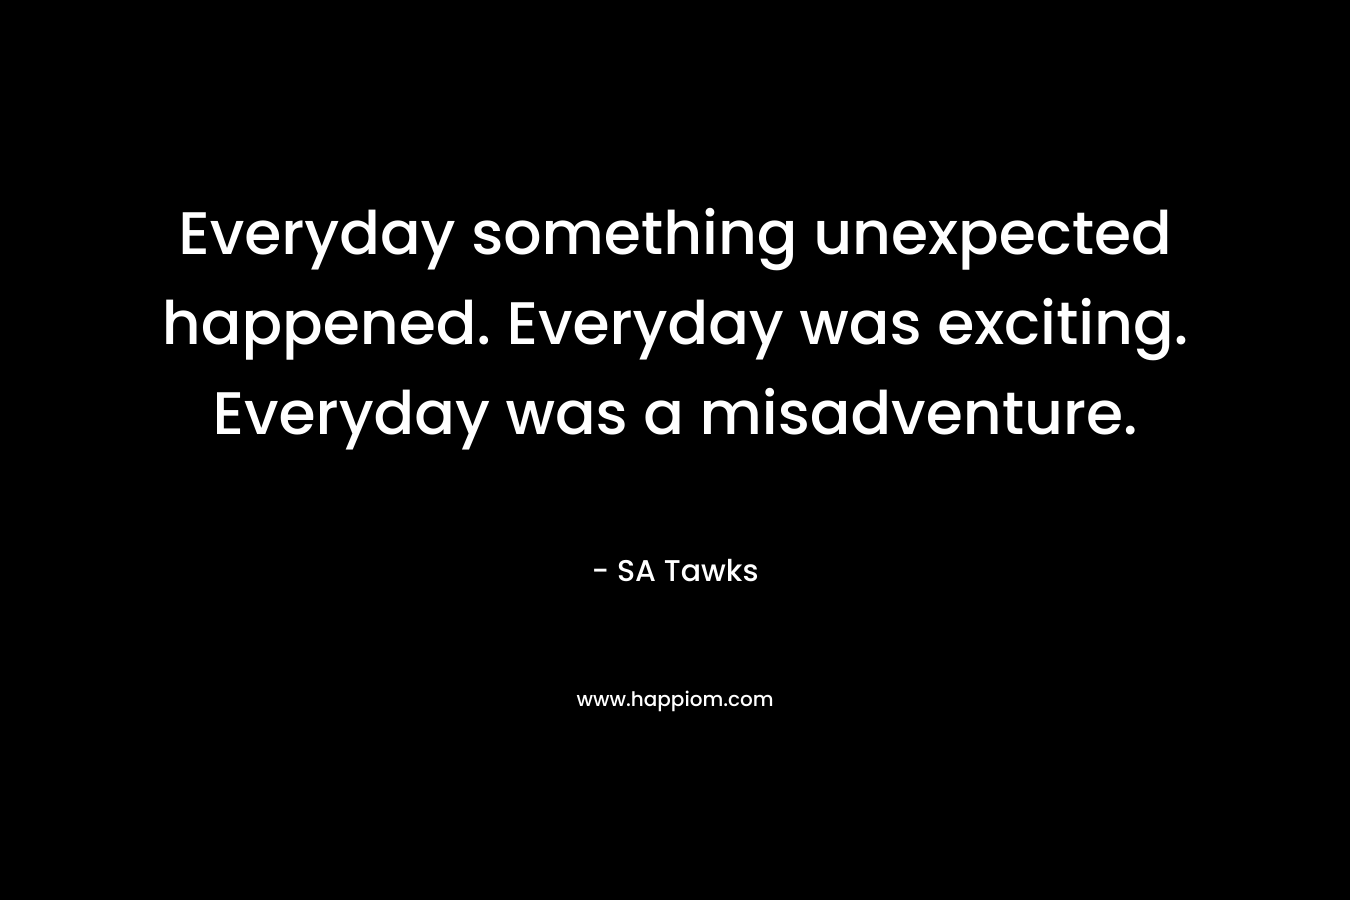 Everyday something unexpected happened. Everyday was exciting. Everyday was a misadventure. – SA Tawks